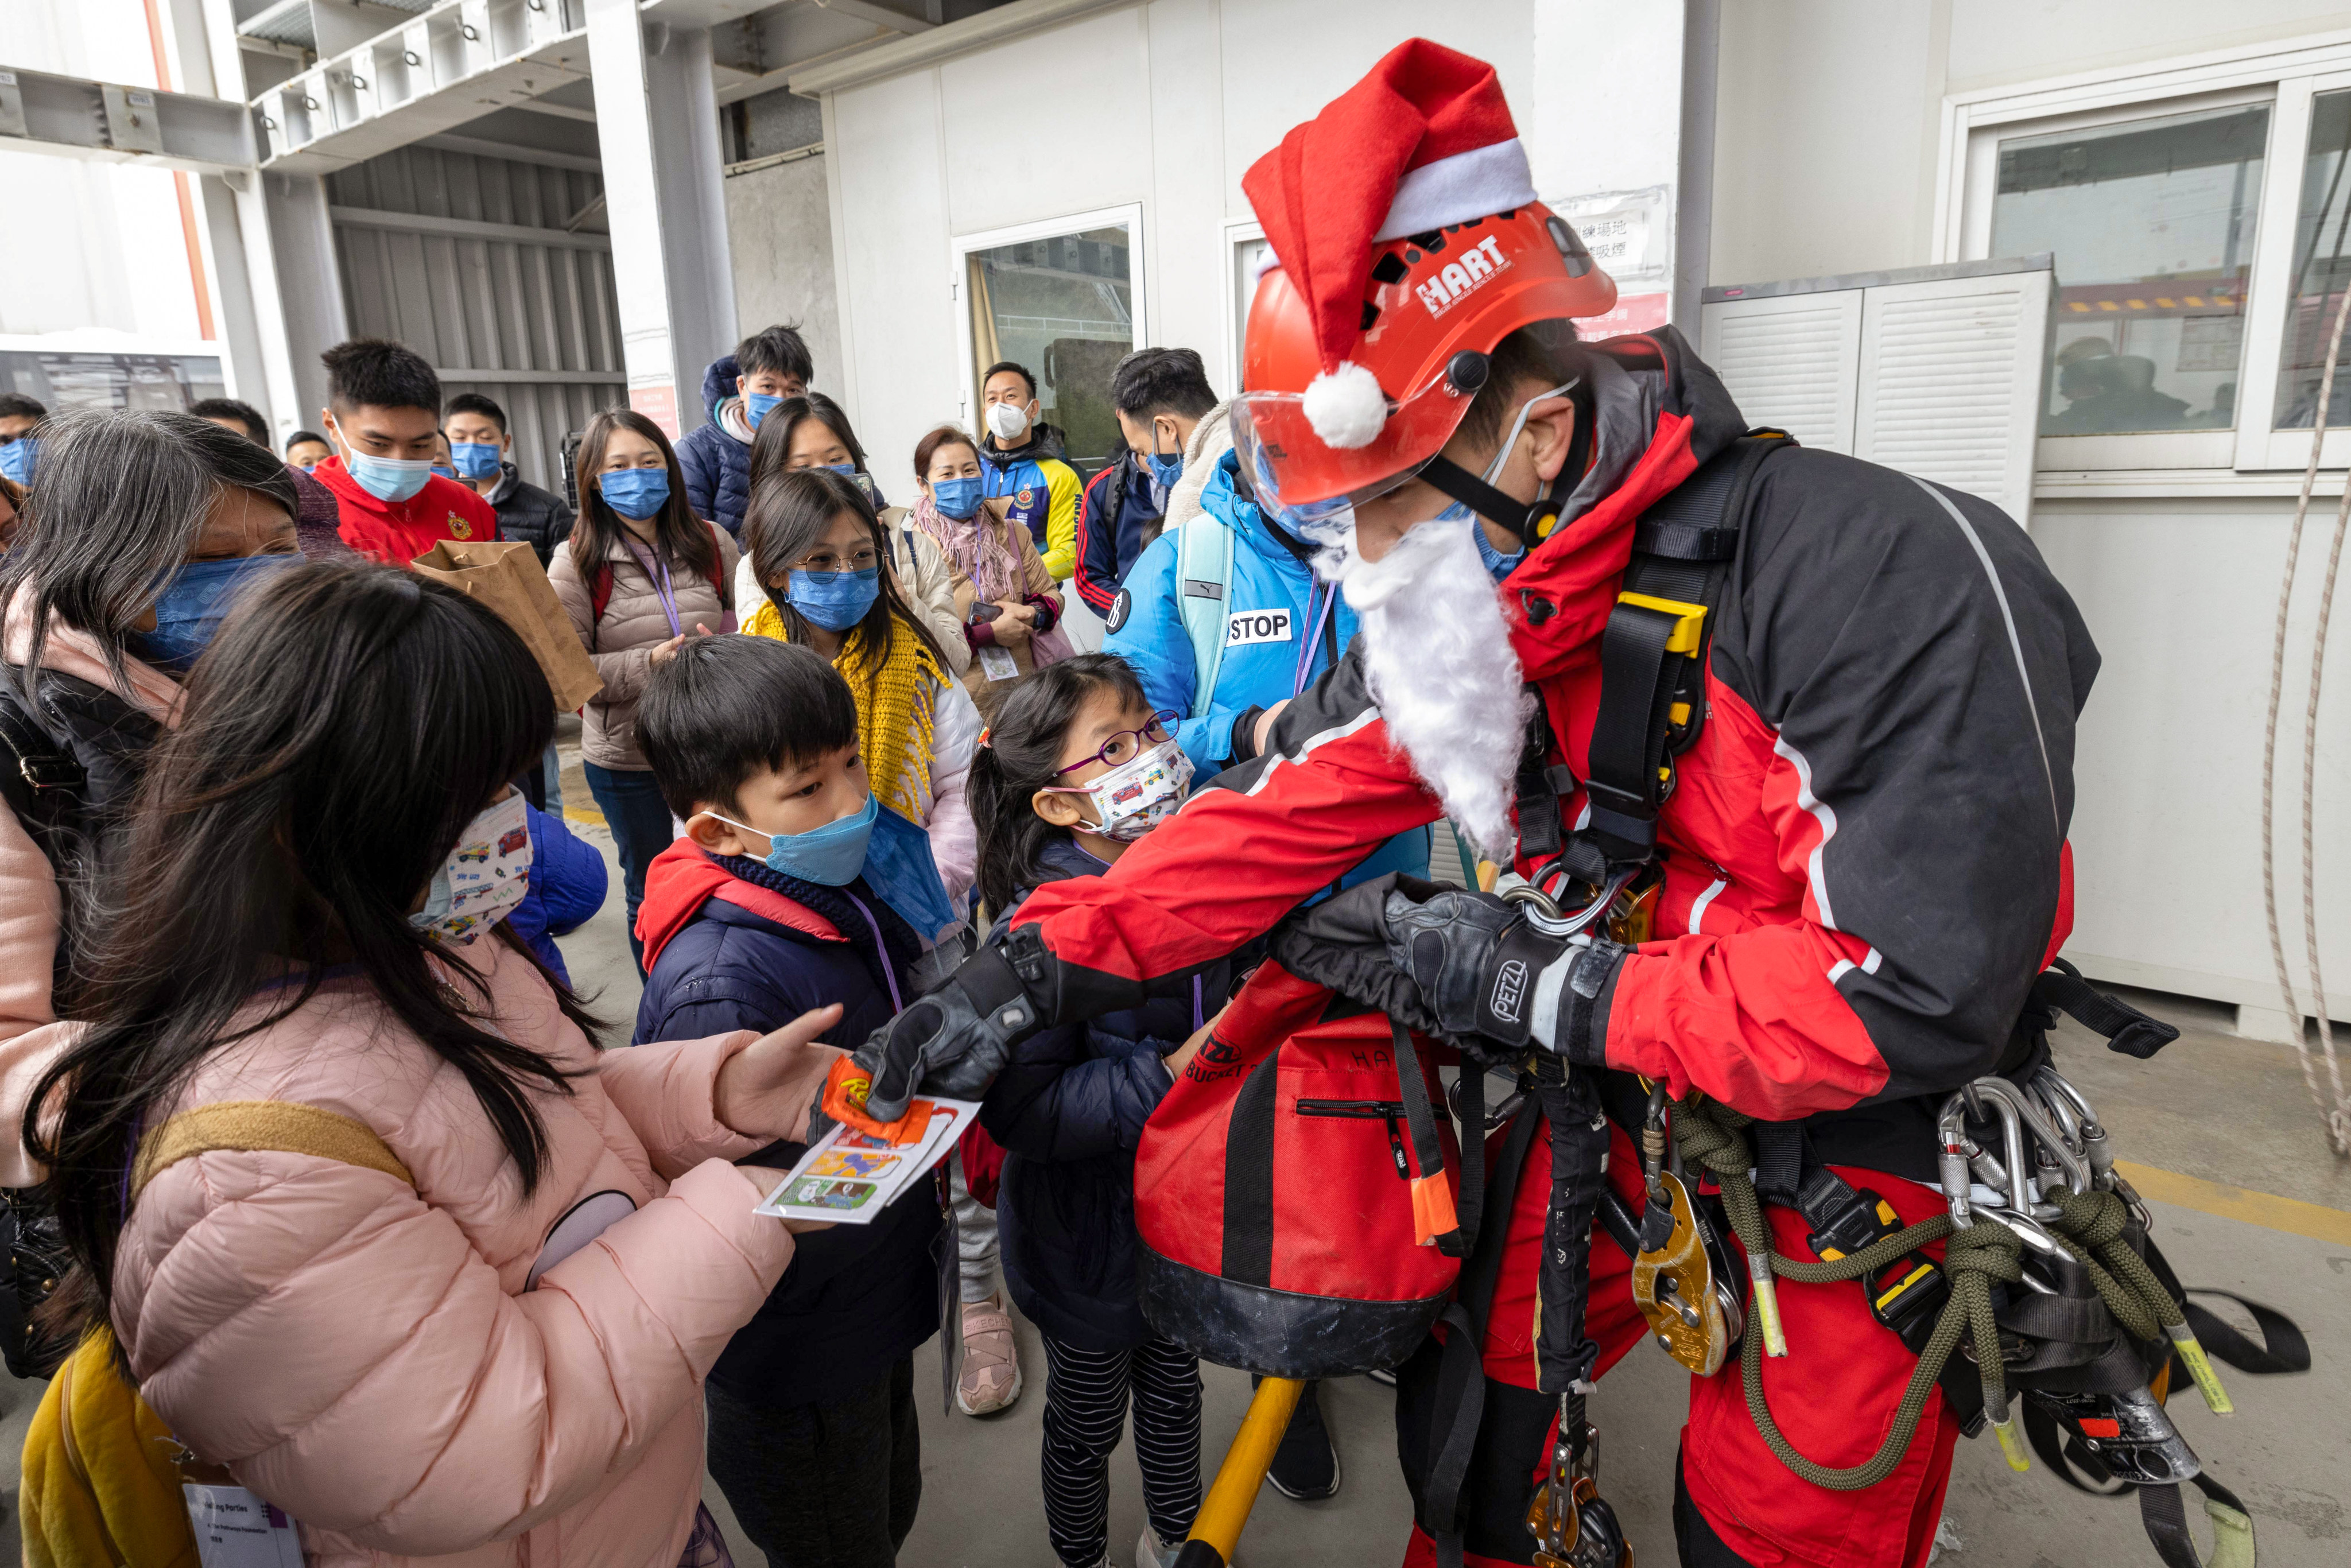 Santa Claus hands out presents to children at the Fire and Ambulance Services Academy in Tseung Kwan O. Photo: Handout